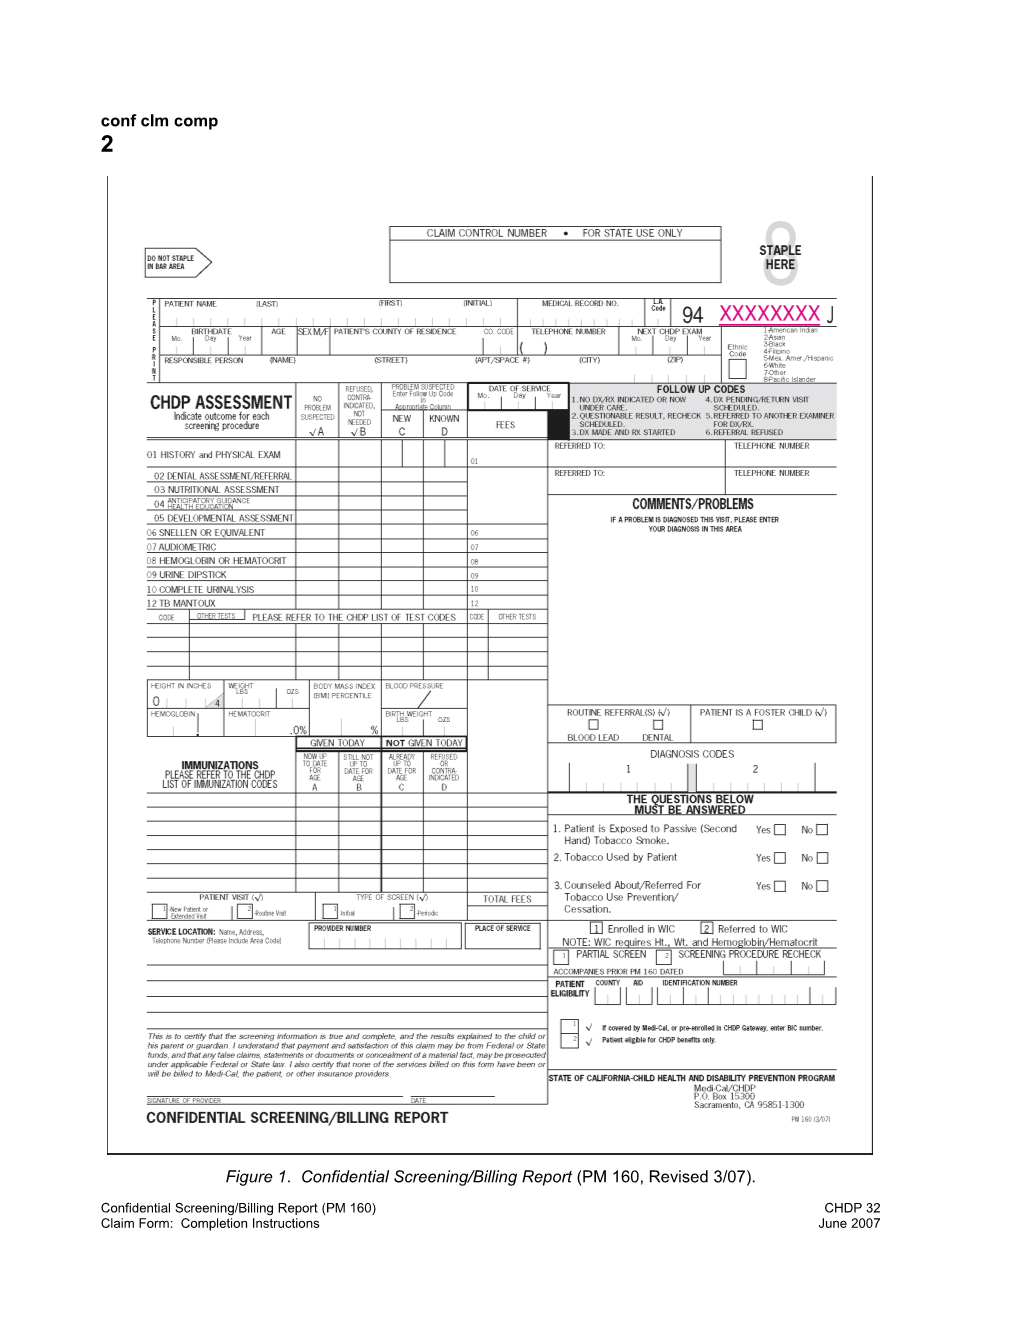 Confidential Screening/Billing Report (PM 160) Claim Form: Completion Instructions (Conf